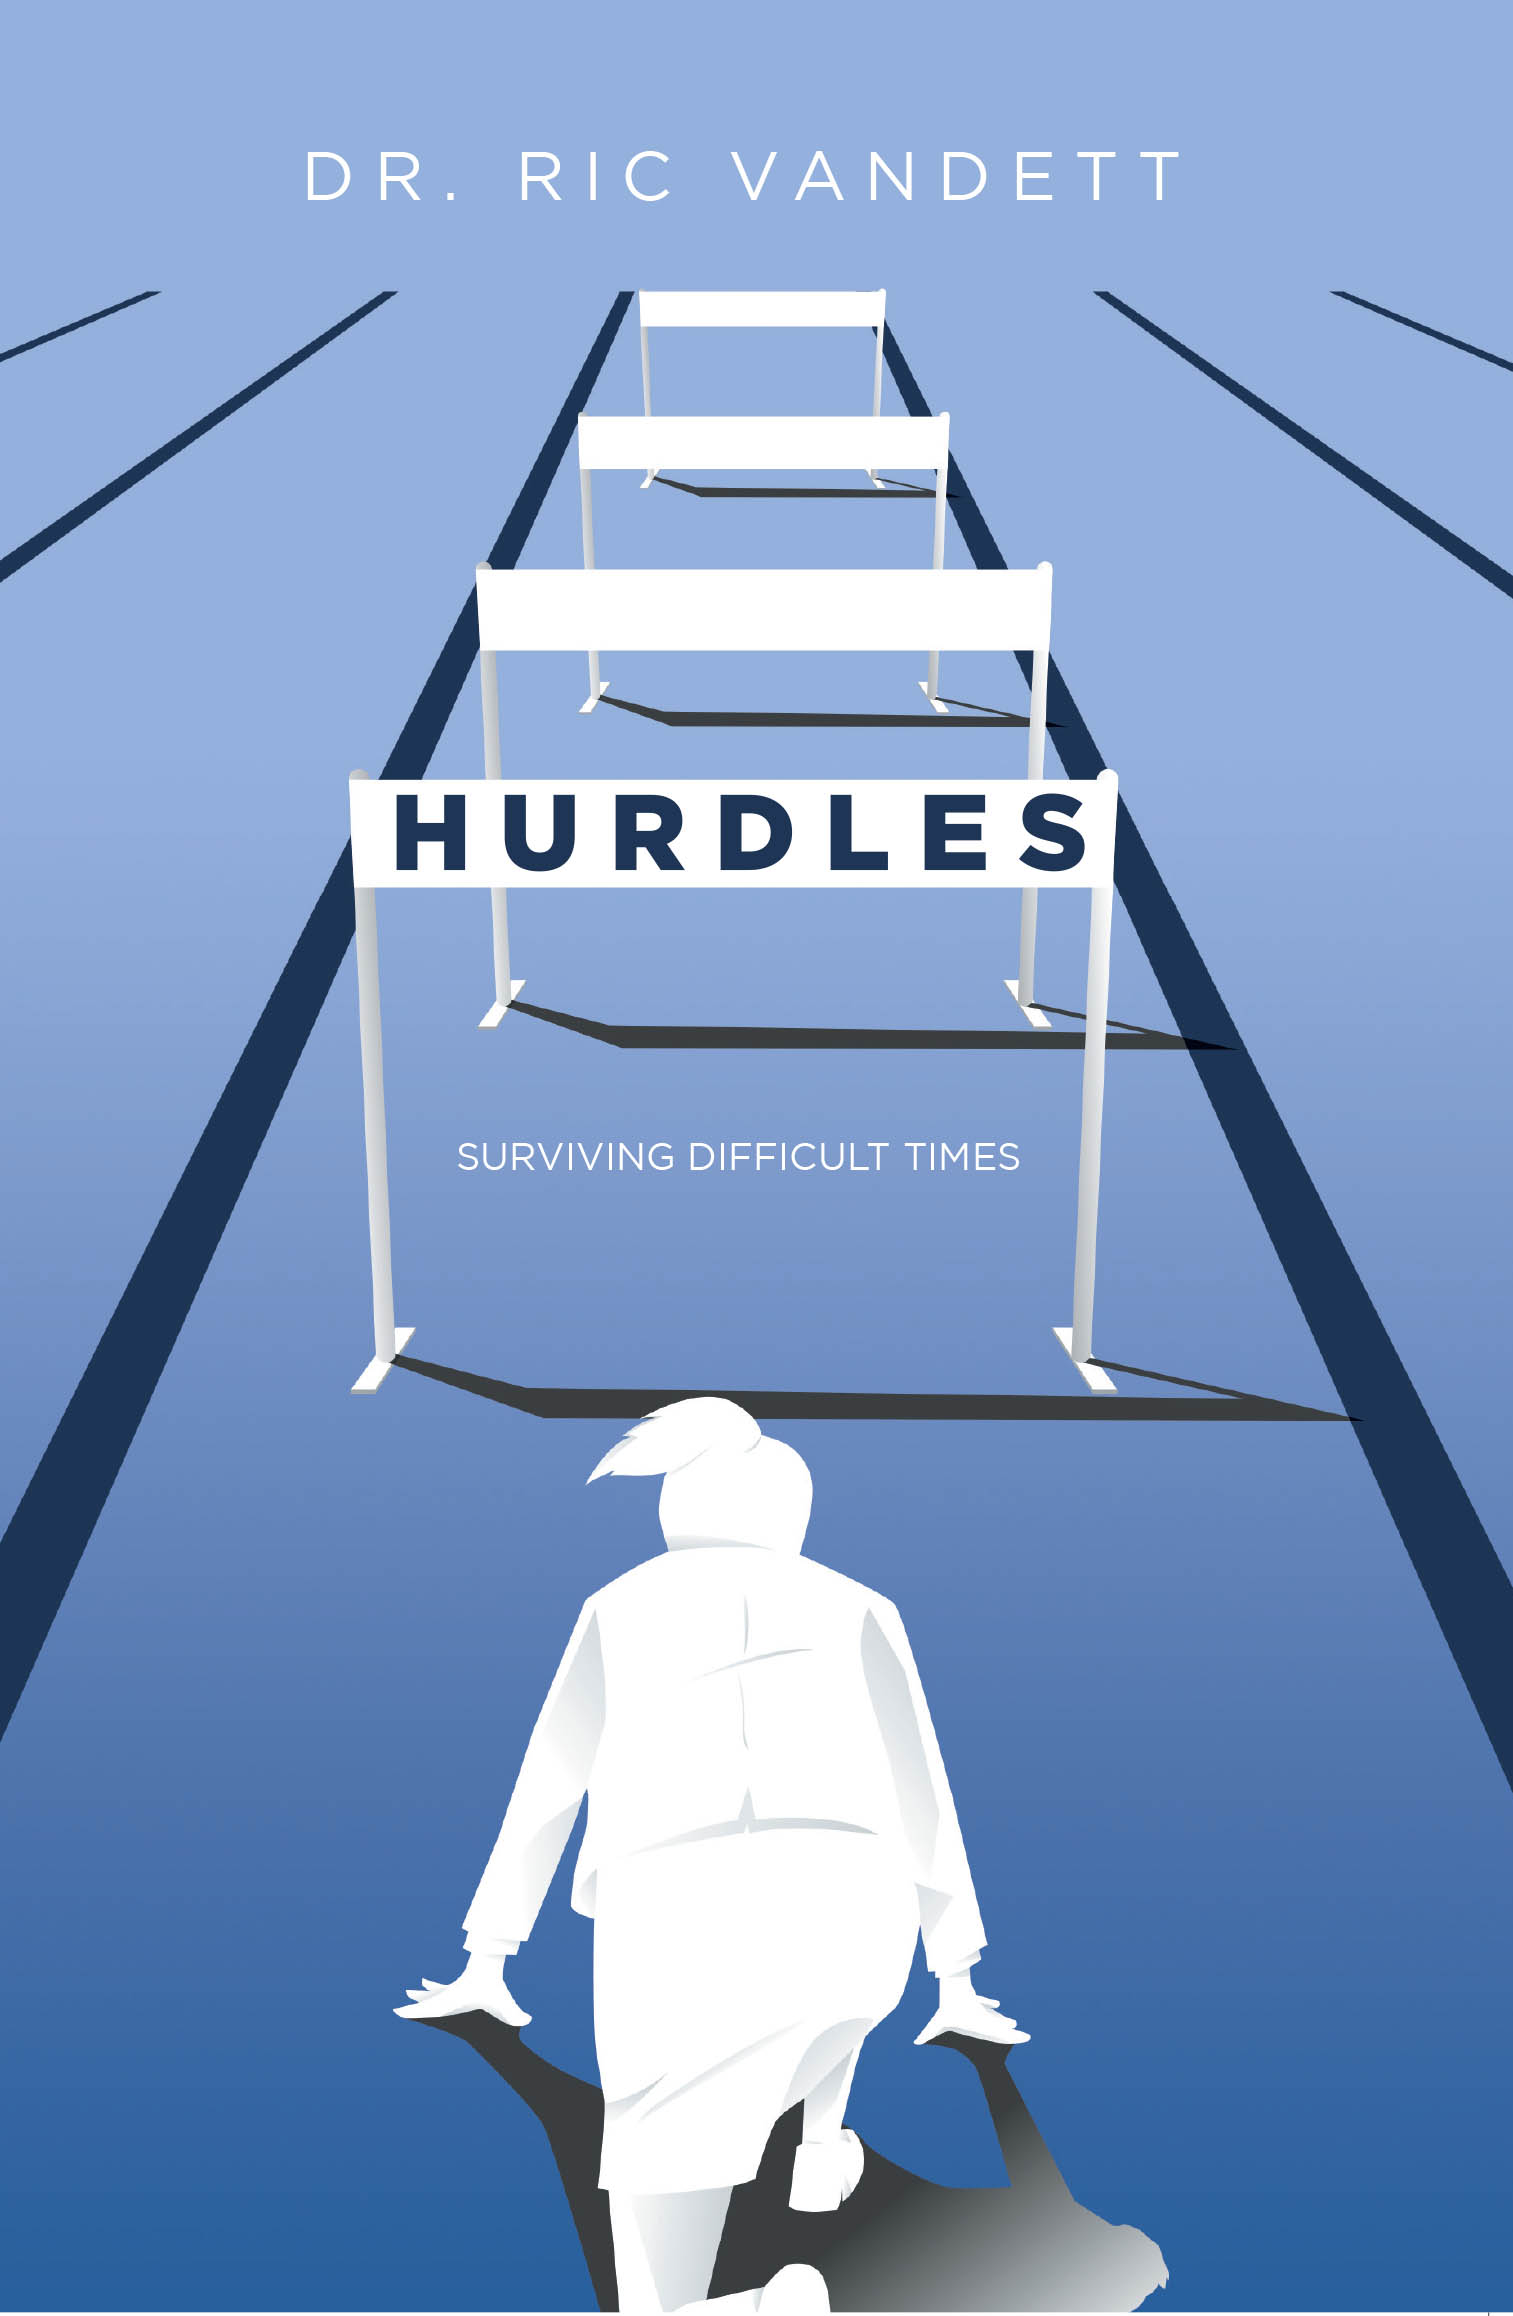 Author Dr. Ric Vandett’s New Book, "Hurdles: Surviving Difficult Times," is a Profound Guide to Navigating and Persevering Through the Challenges One's Life May Present